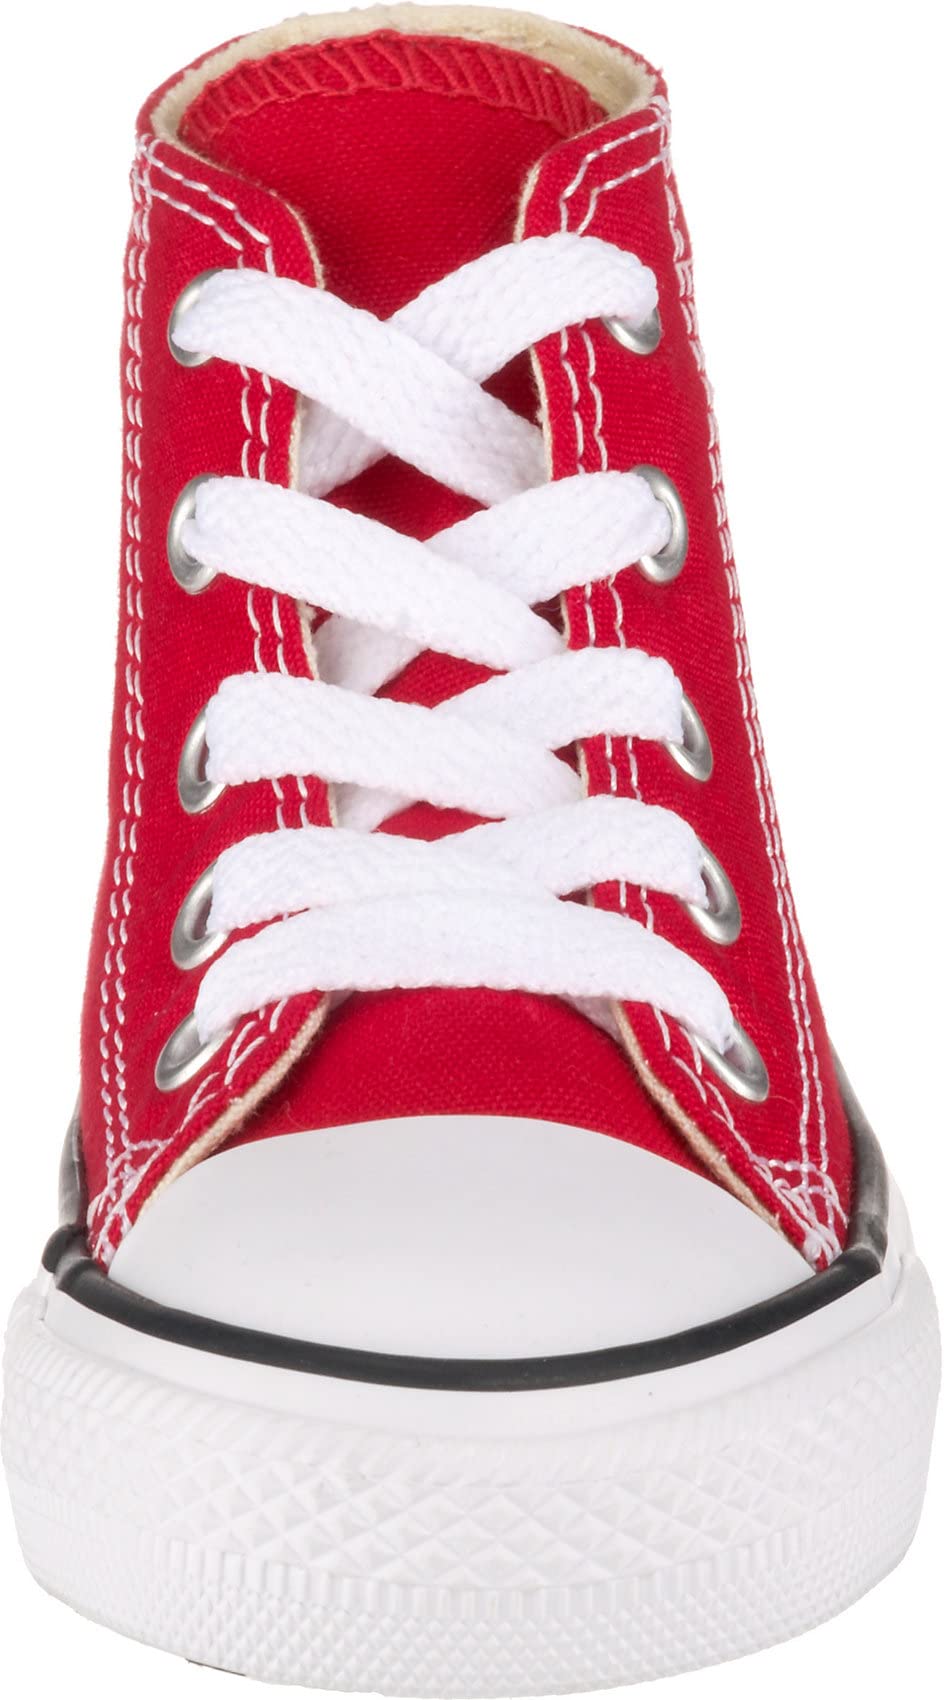 Converse Kids' Chuck Taylor All Star Canvas High Top Sneaker, red, 5 M US Toddler